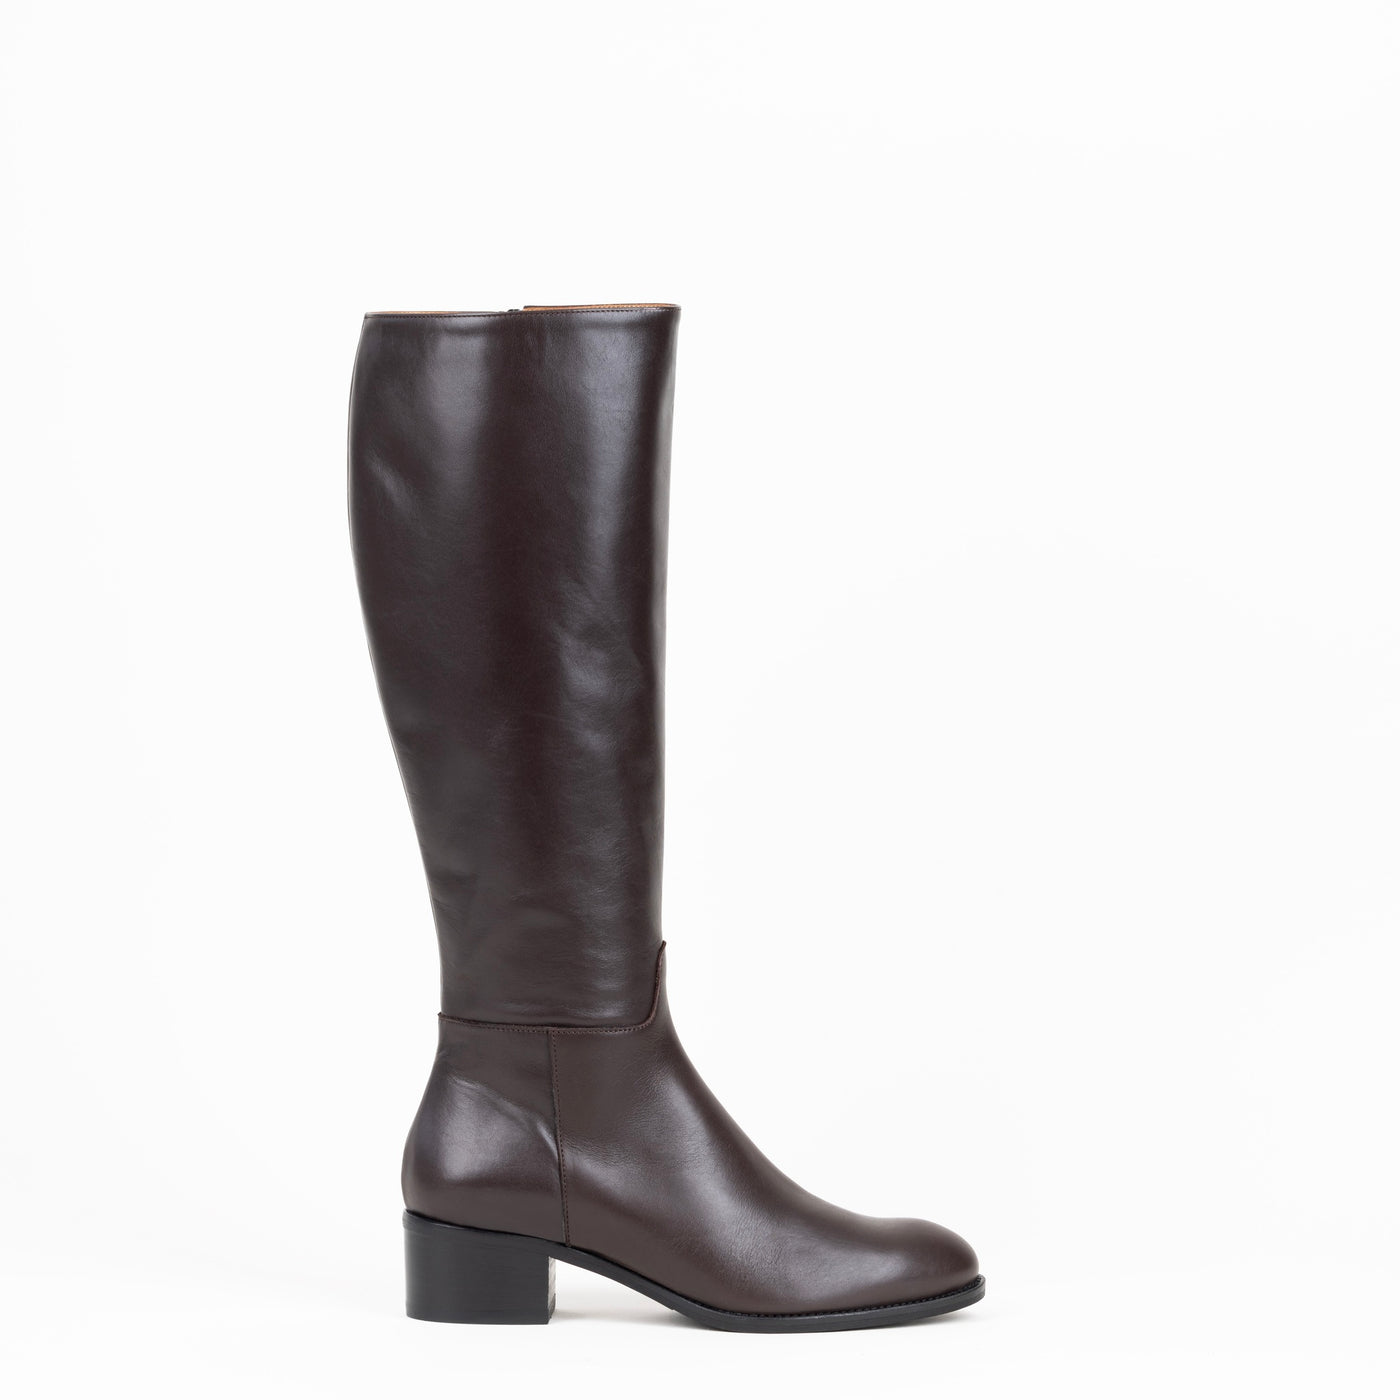 Riding inspired classic women's boots in brown leather